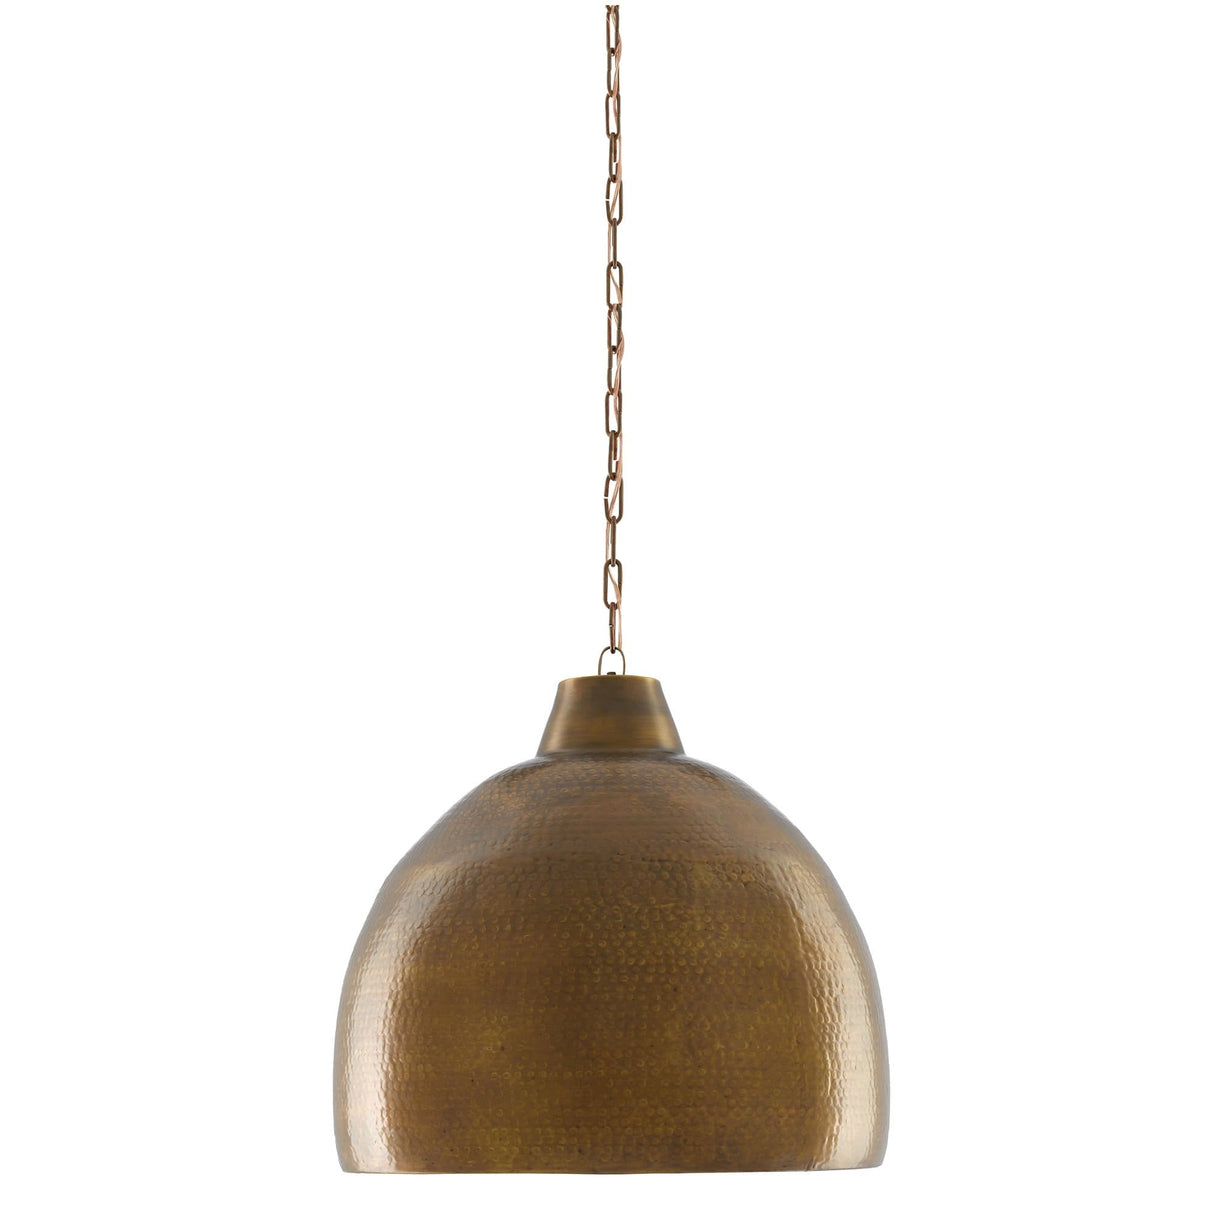 Currey and Company Earthshine Pendant - Brass Lighting currey-co-9000-0425